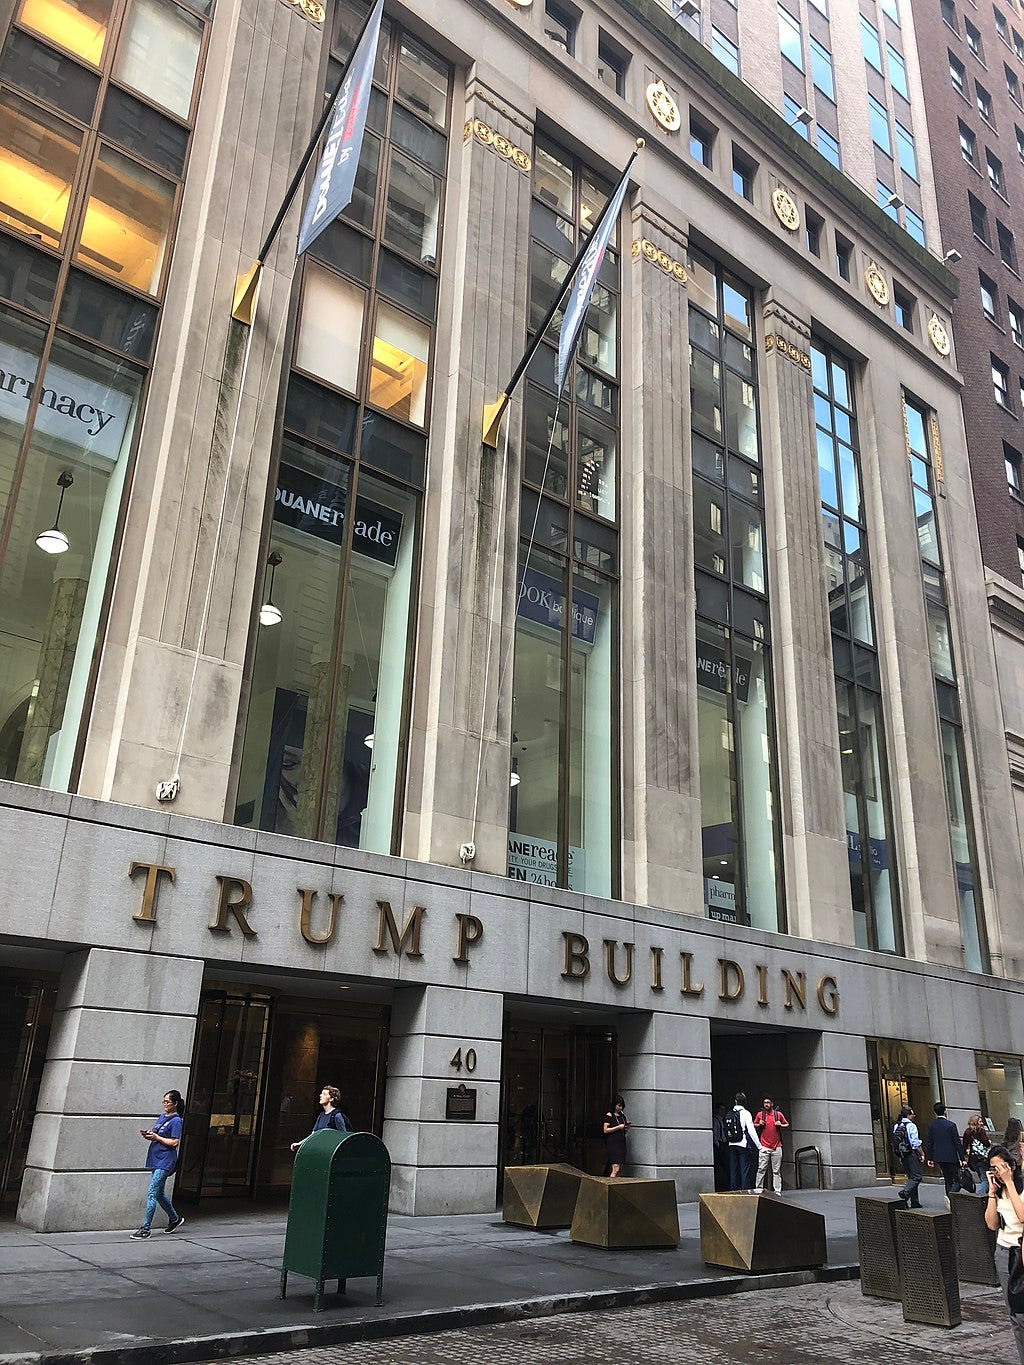 The facade of the building as seen from Wall Street. The first story is clad with granite and has several openings; the words "Trump Building" are visible above the granite columns. Above the first story are several floors of windows, which are separated by vertical stone piers.